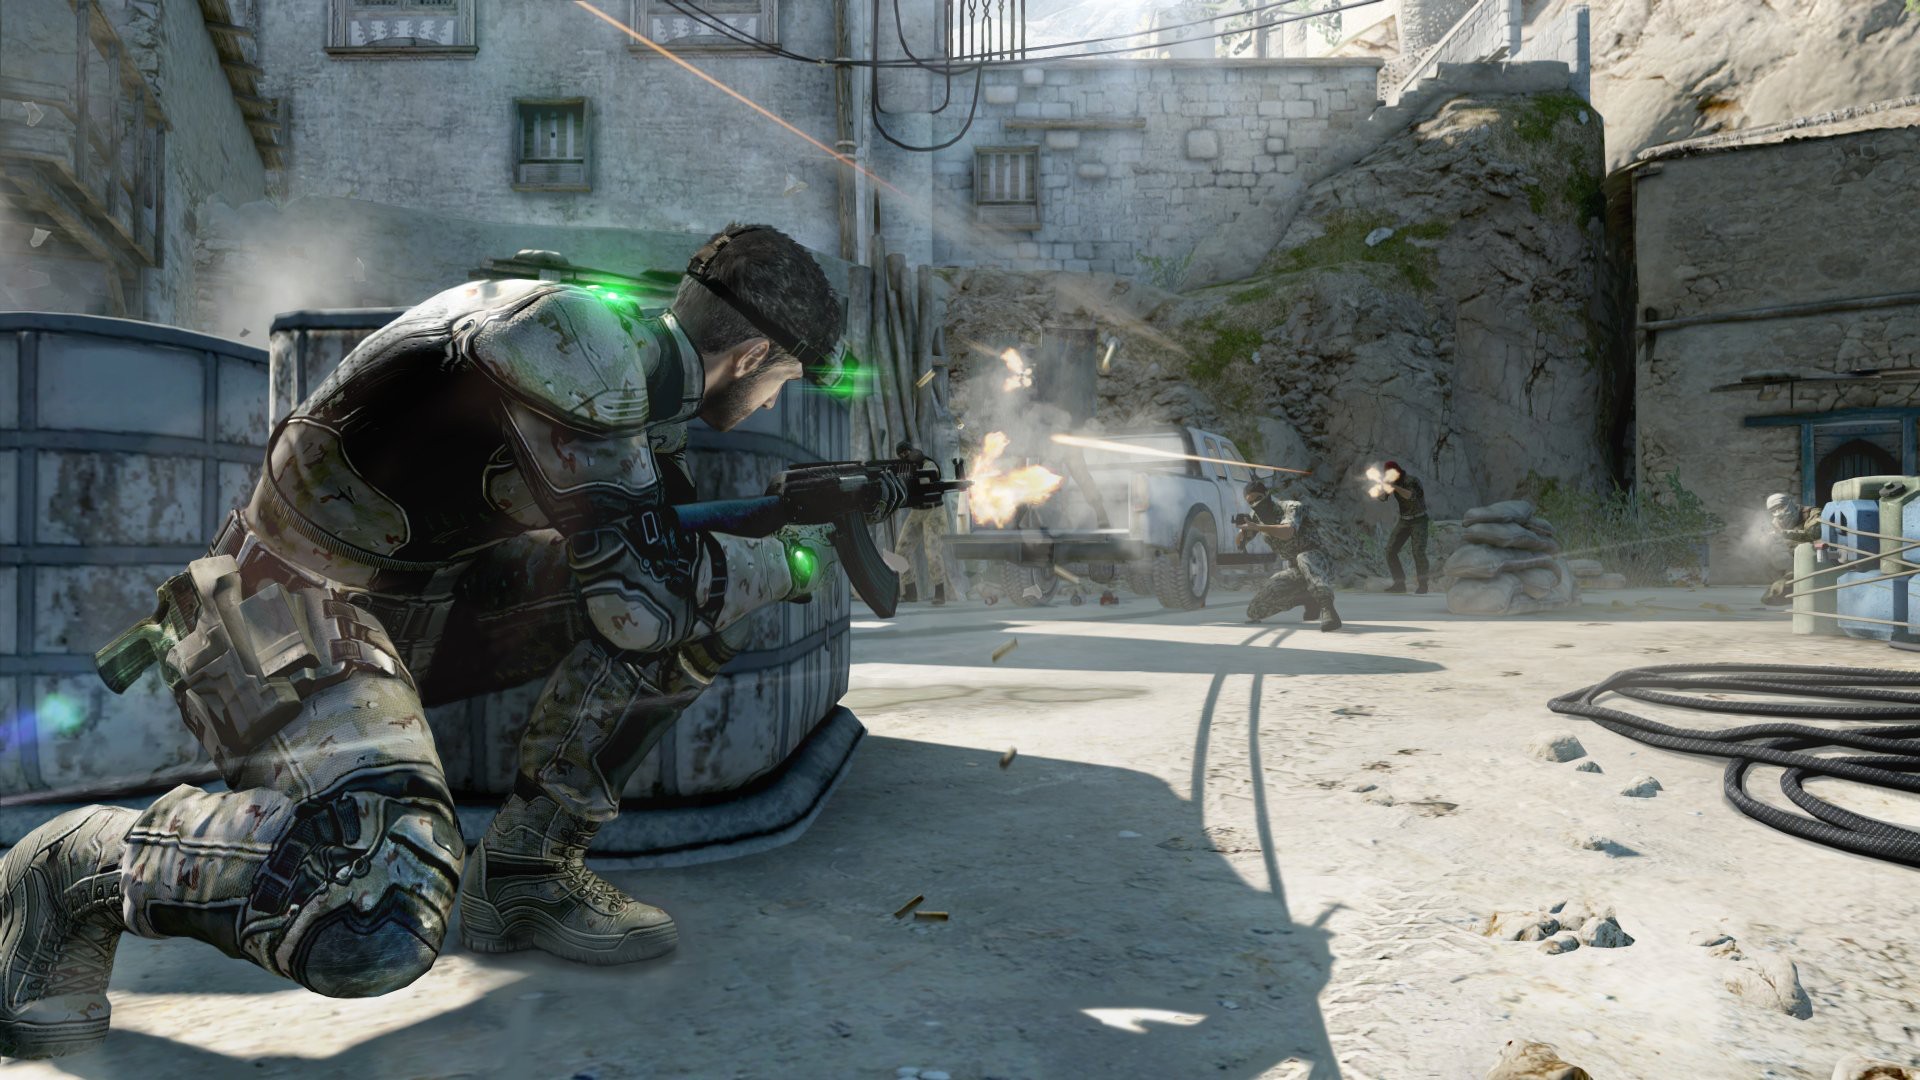 Splinter Cell Blacklist - The 5th Freedom Silver Edition Revealed pic 2